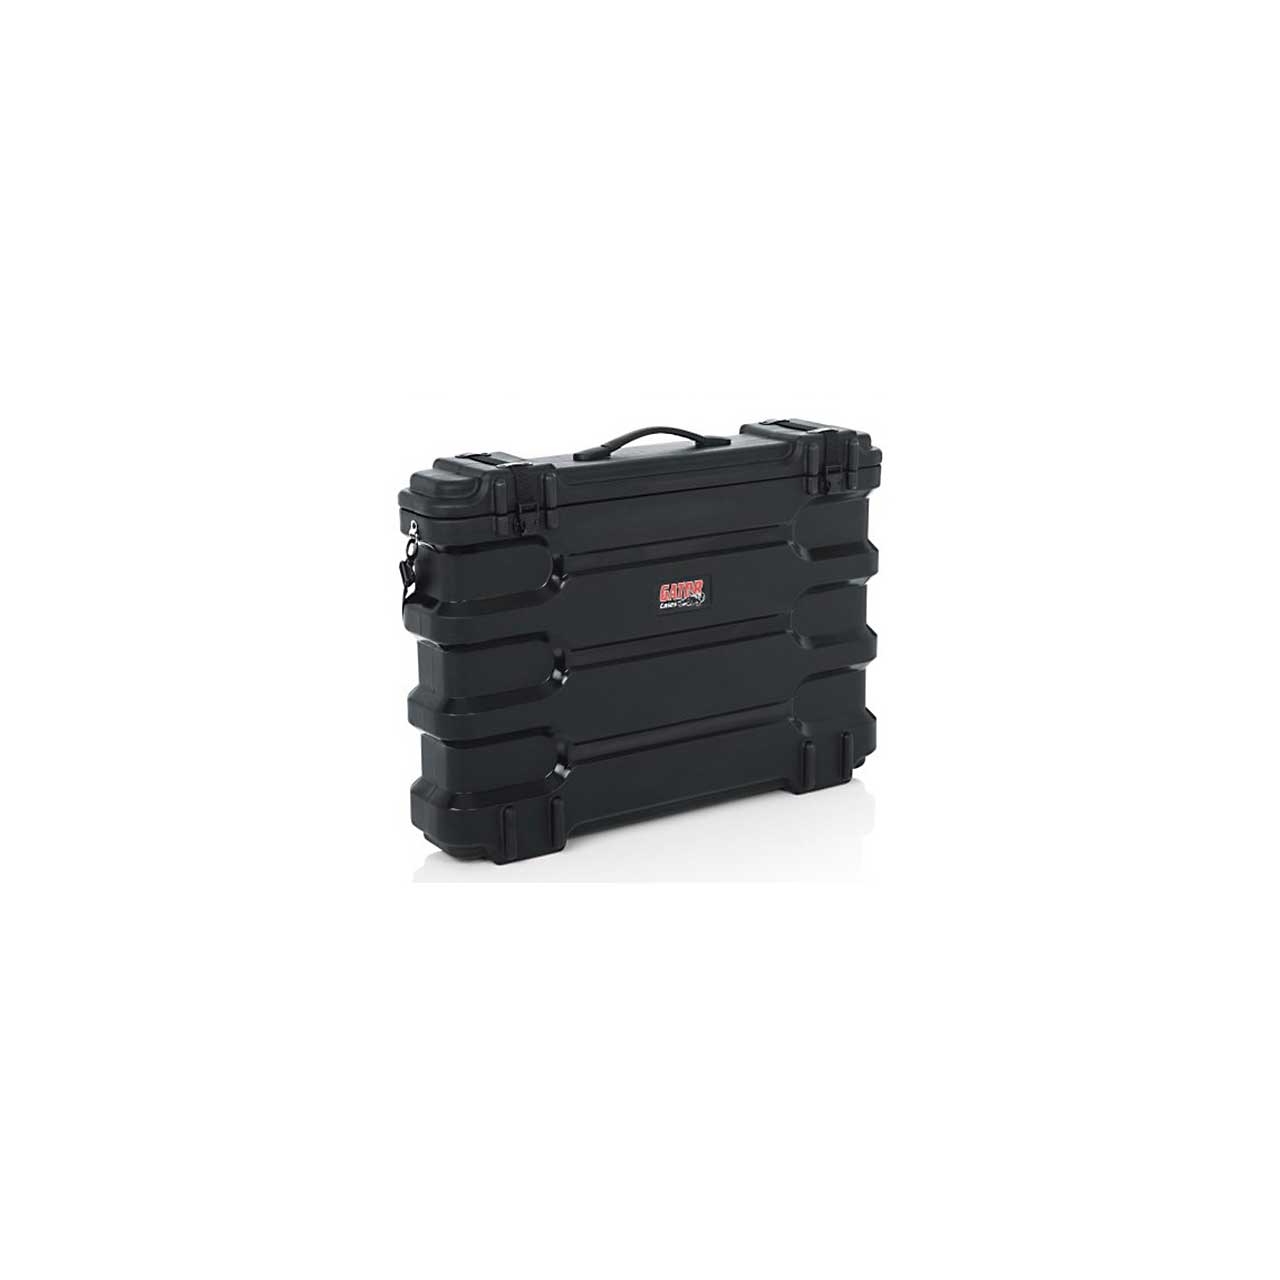 Gator GLED2732ROTO Rotationally Molded Case for Transporting LCD/LED  Screens Between 27 Inch - 32 Inch